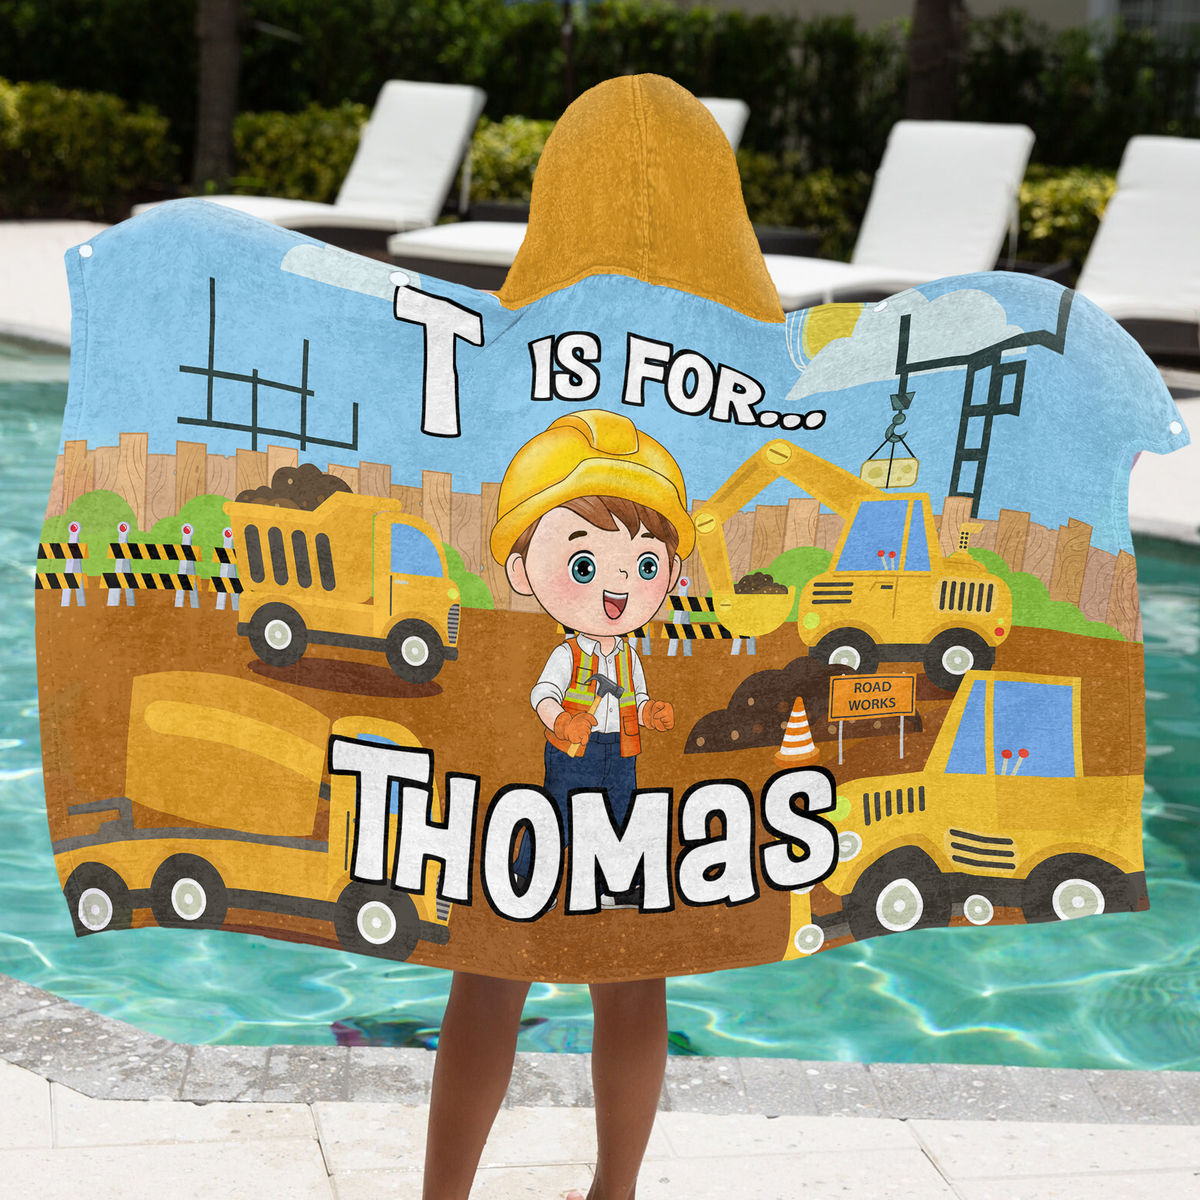 Hooded Towel - Beach Bath Towel with Hood For Kids - Custom Engineer For Boy - Birthday Gifts for Toddler, Gifts For Kids - Personalized Towel